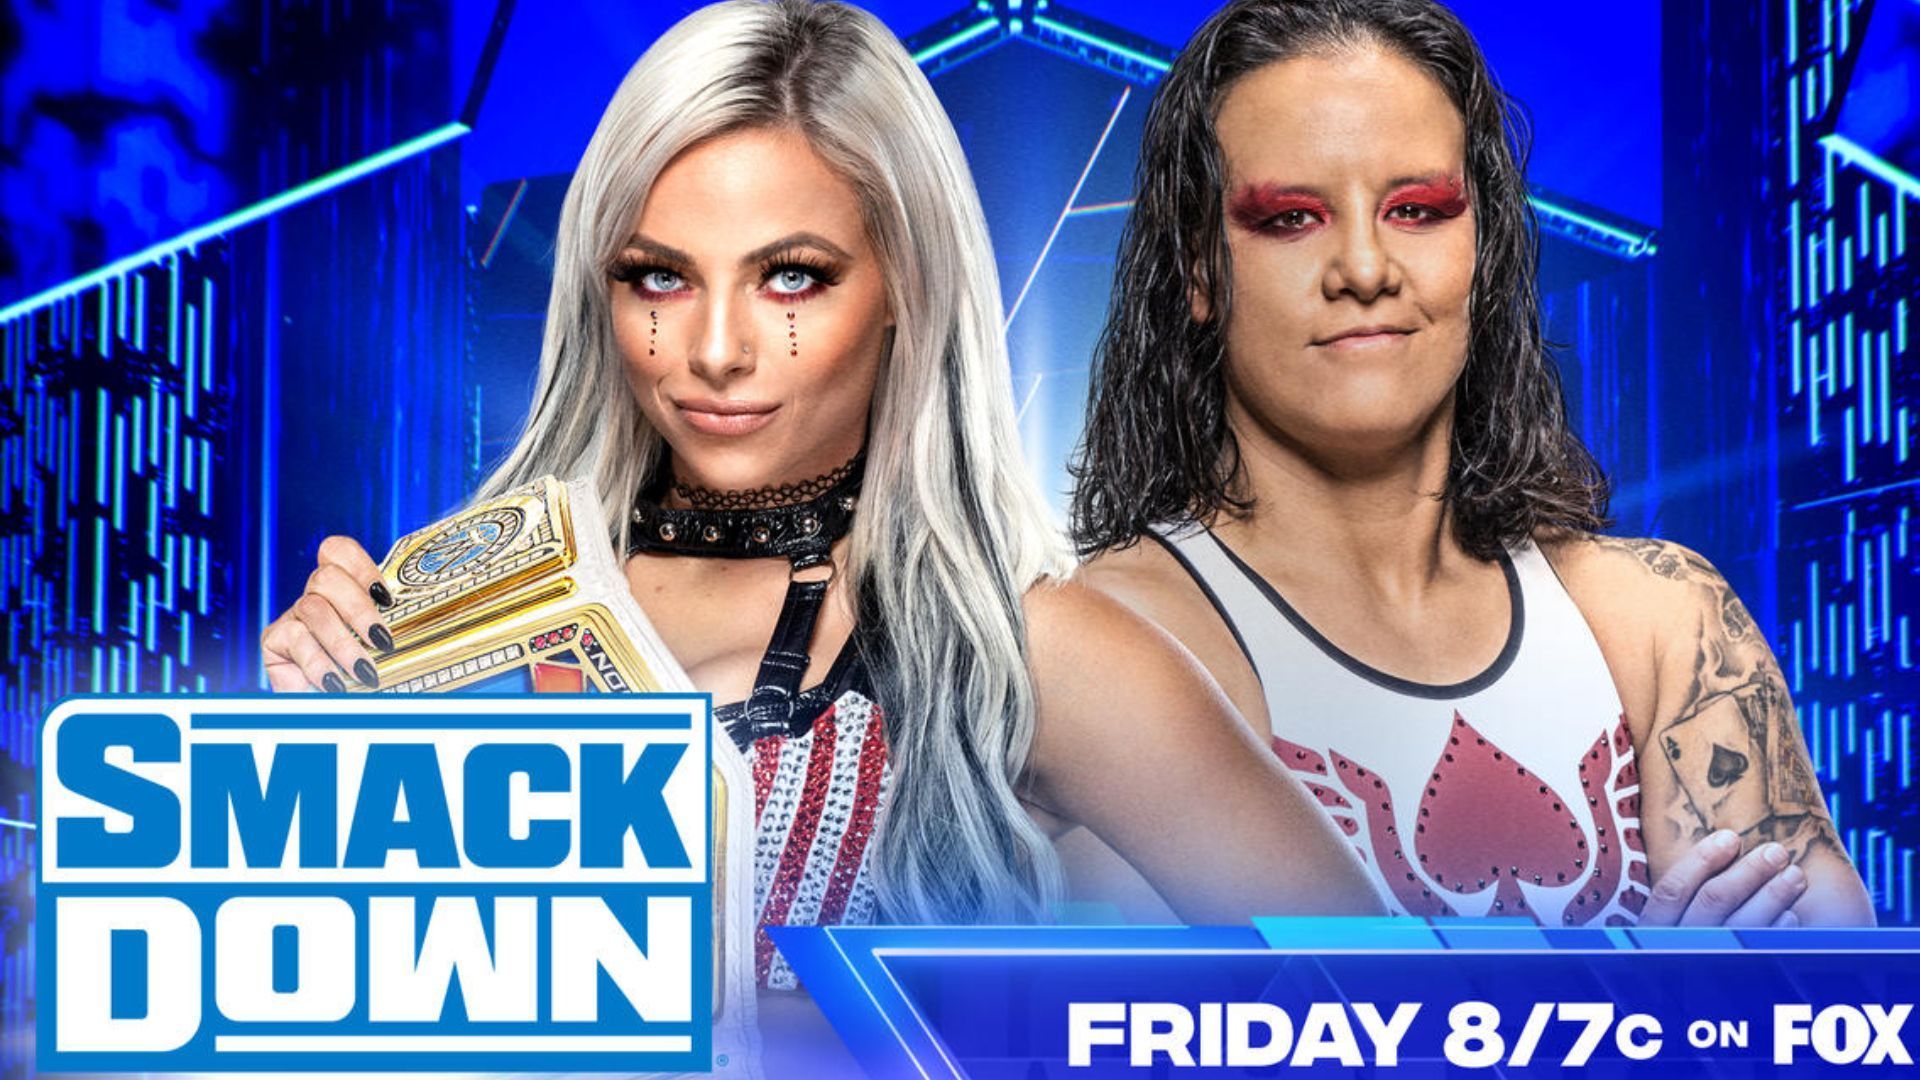 Liv Morgan and Shayna Baszler will battle at WWE Clash at the Castle!